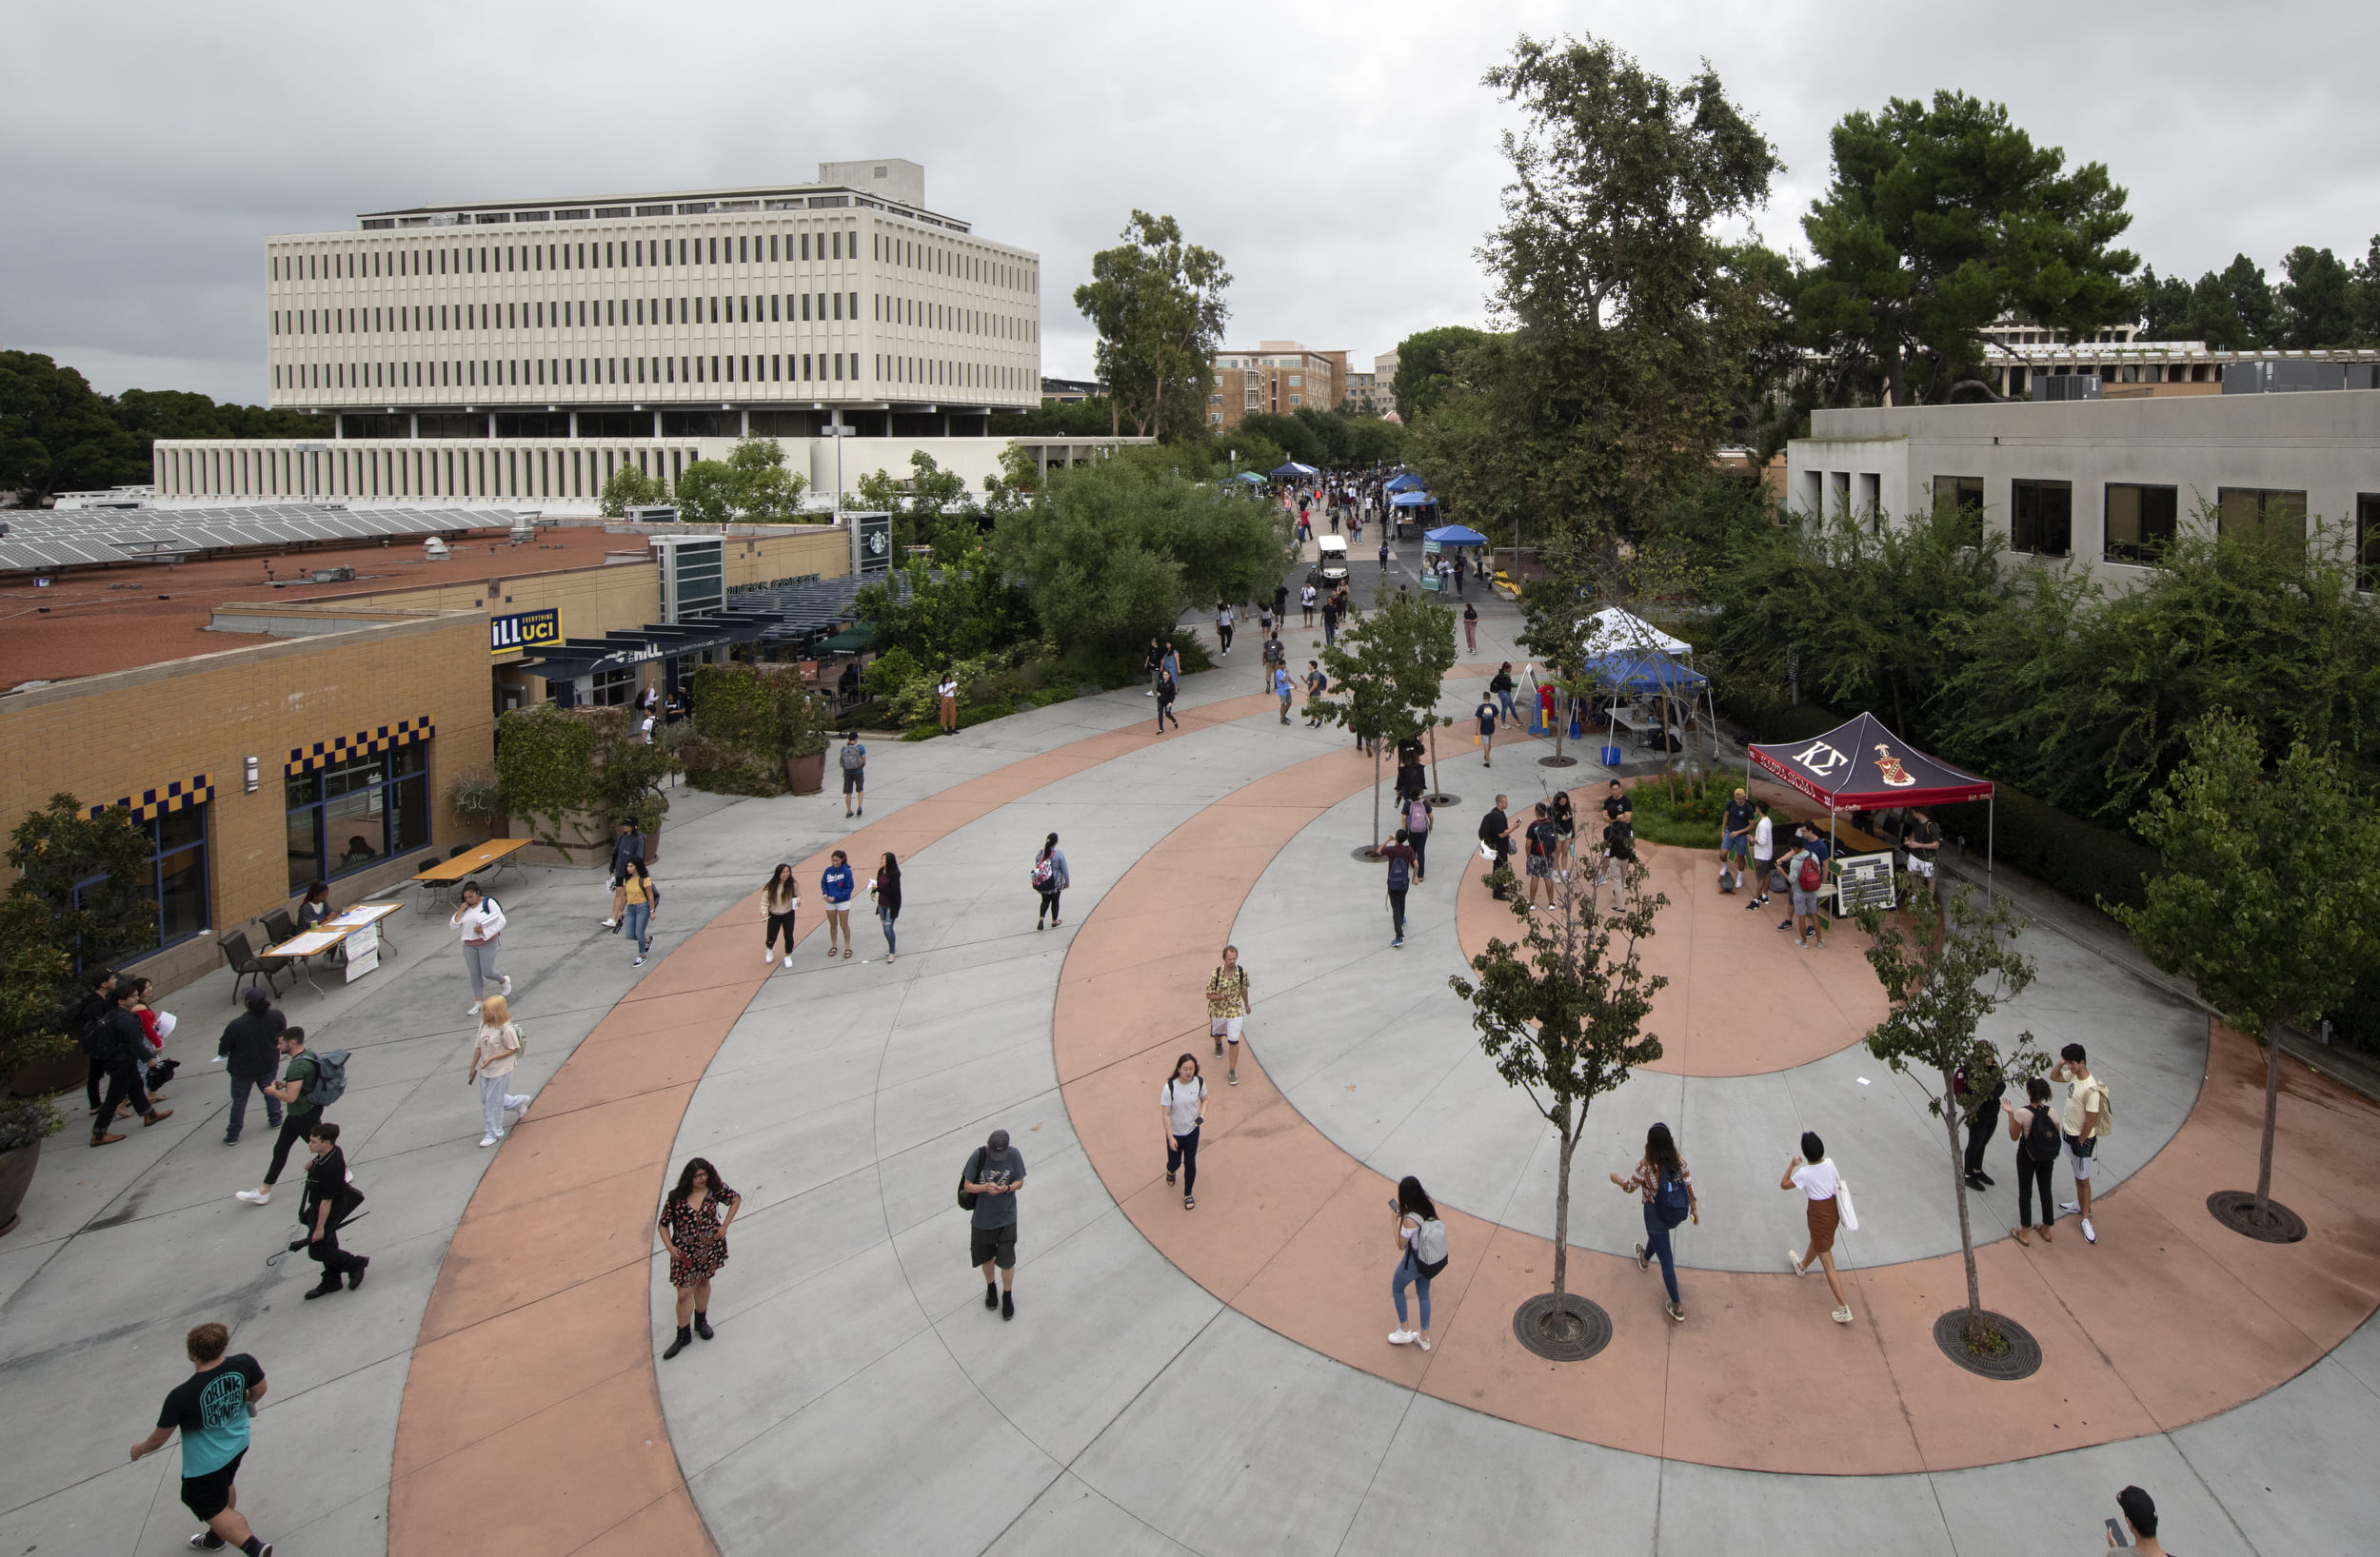 UCI campus: first day of fall classes in 2019, students walking near the student center.